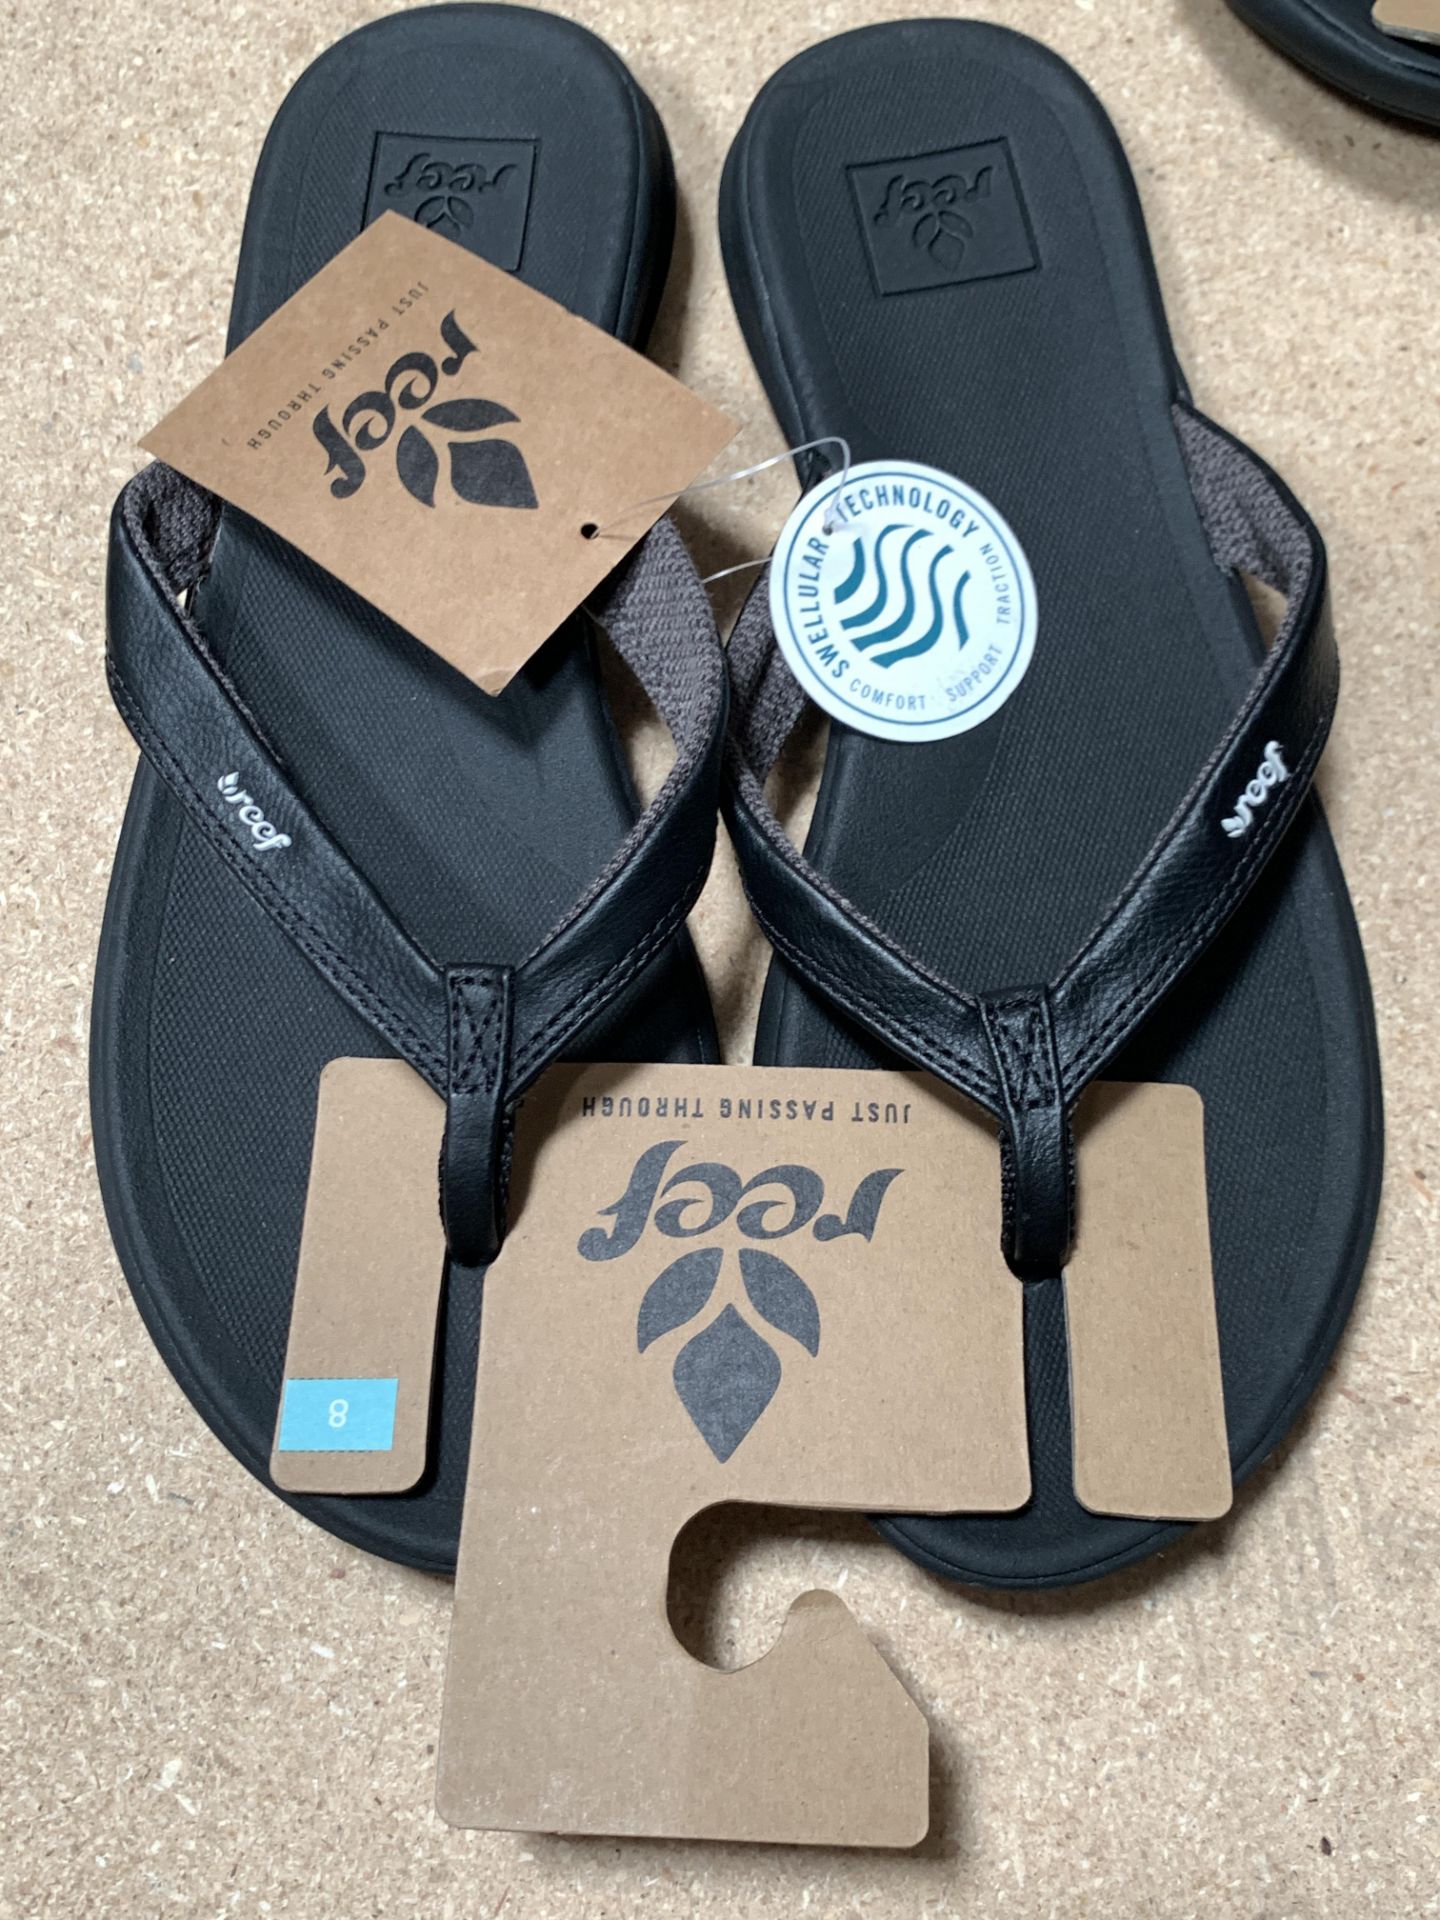 10 REEF Flip Flop Sandals, New w. Tags, Various Sizes, Rover Catch Black (Retail Value $550) - Image 3 of 5